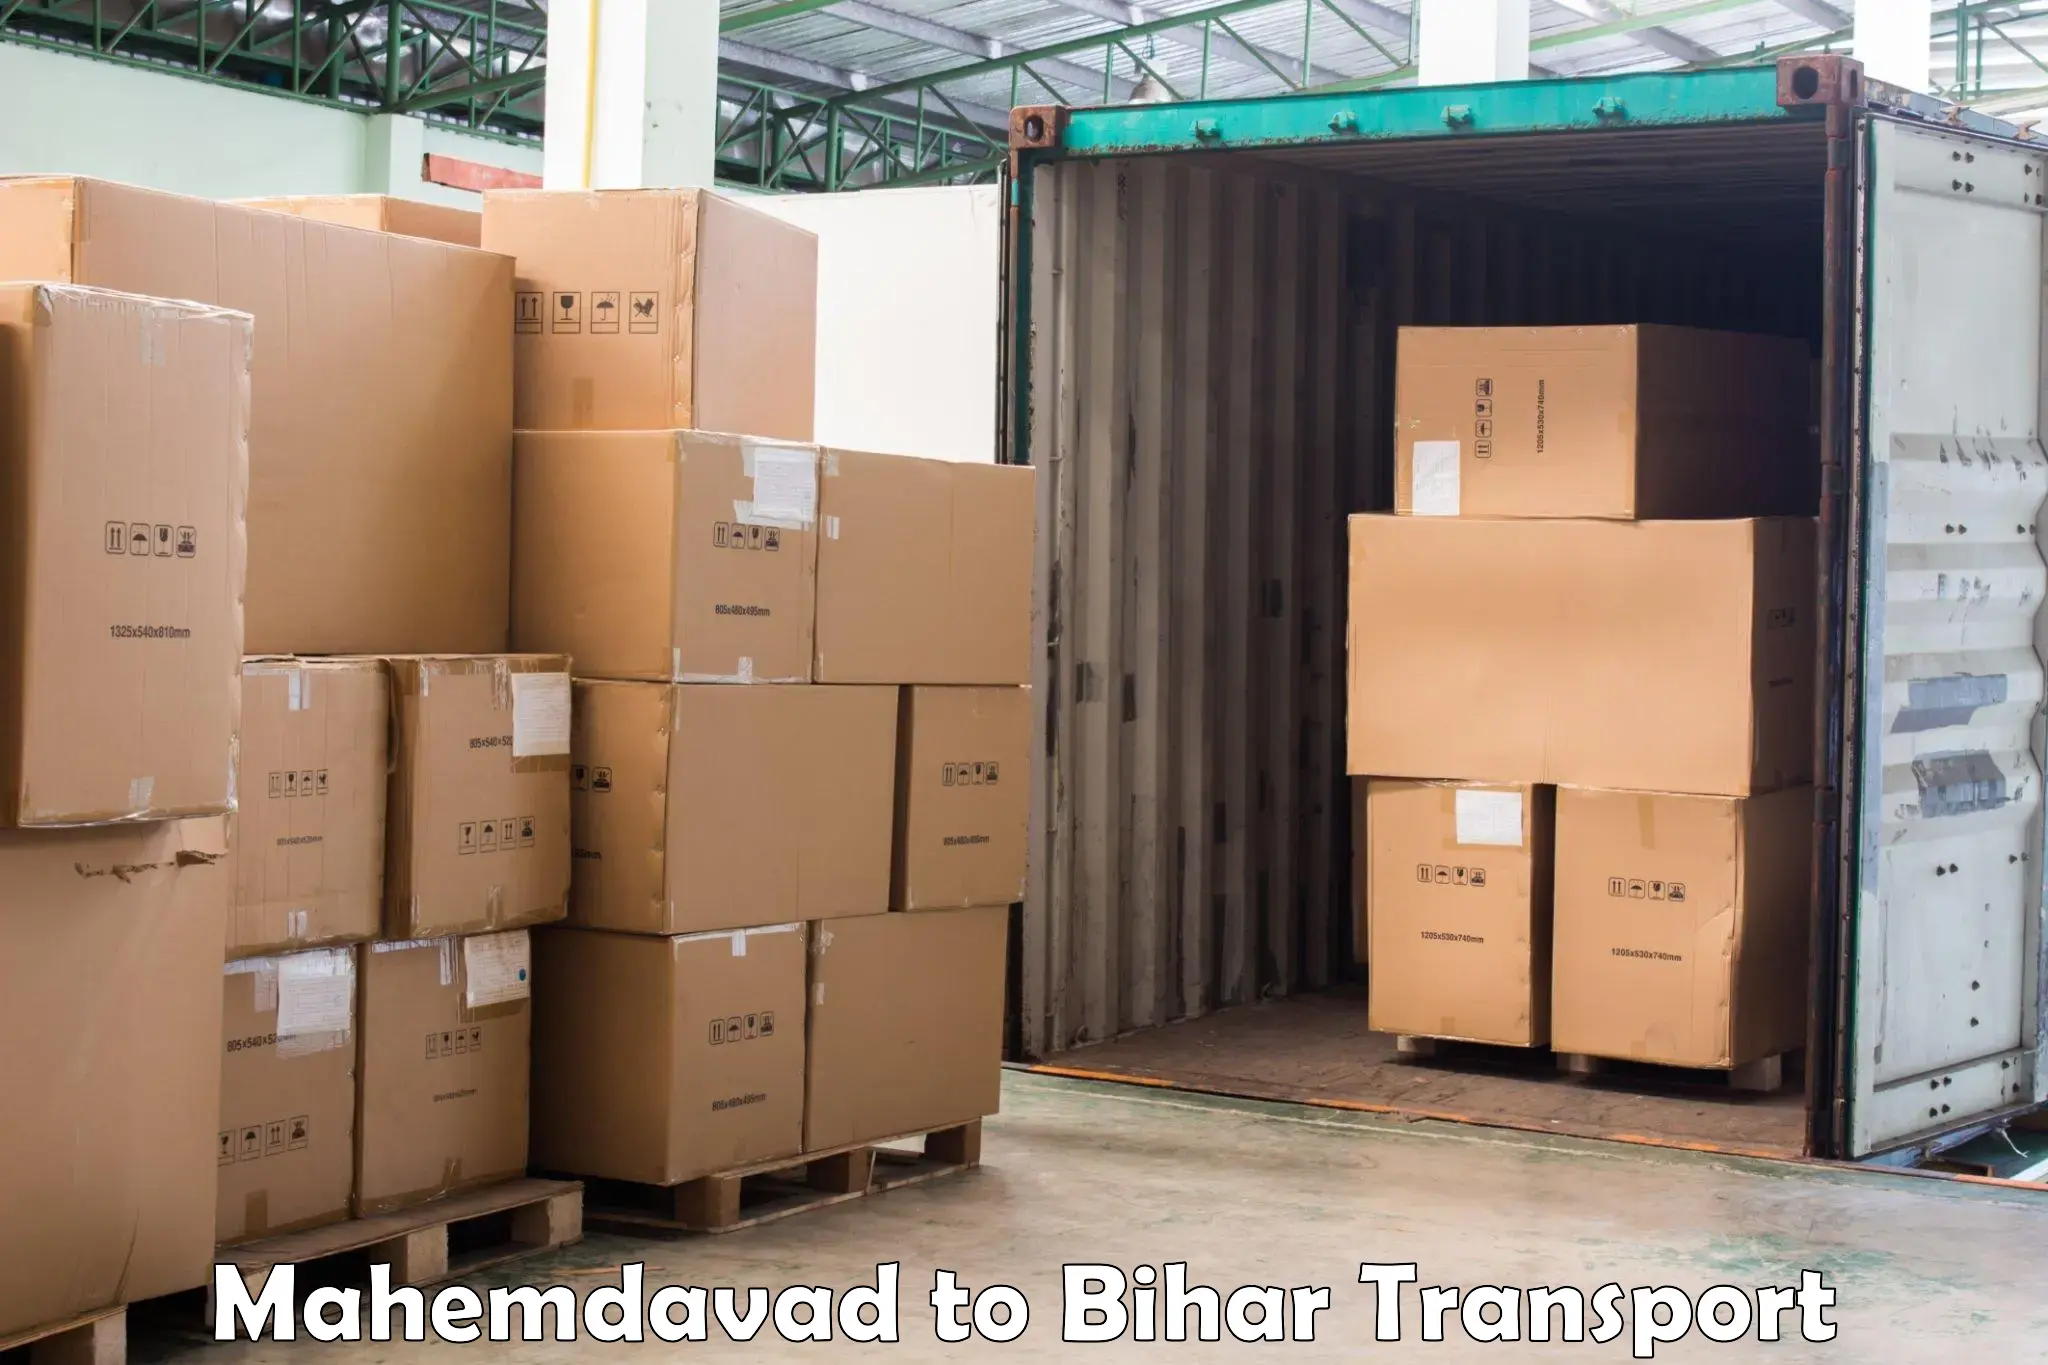 Container transport service Mahemdavad to Bakhri